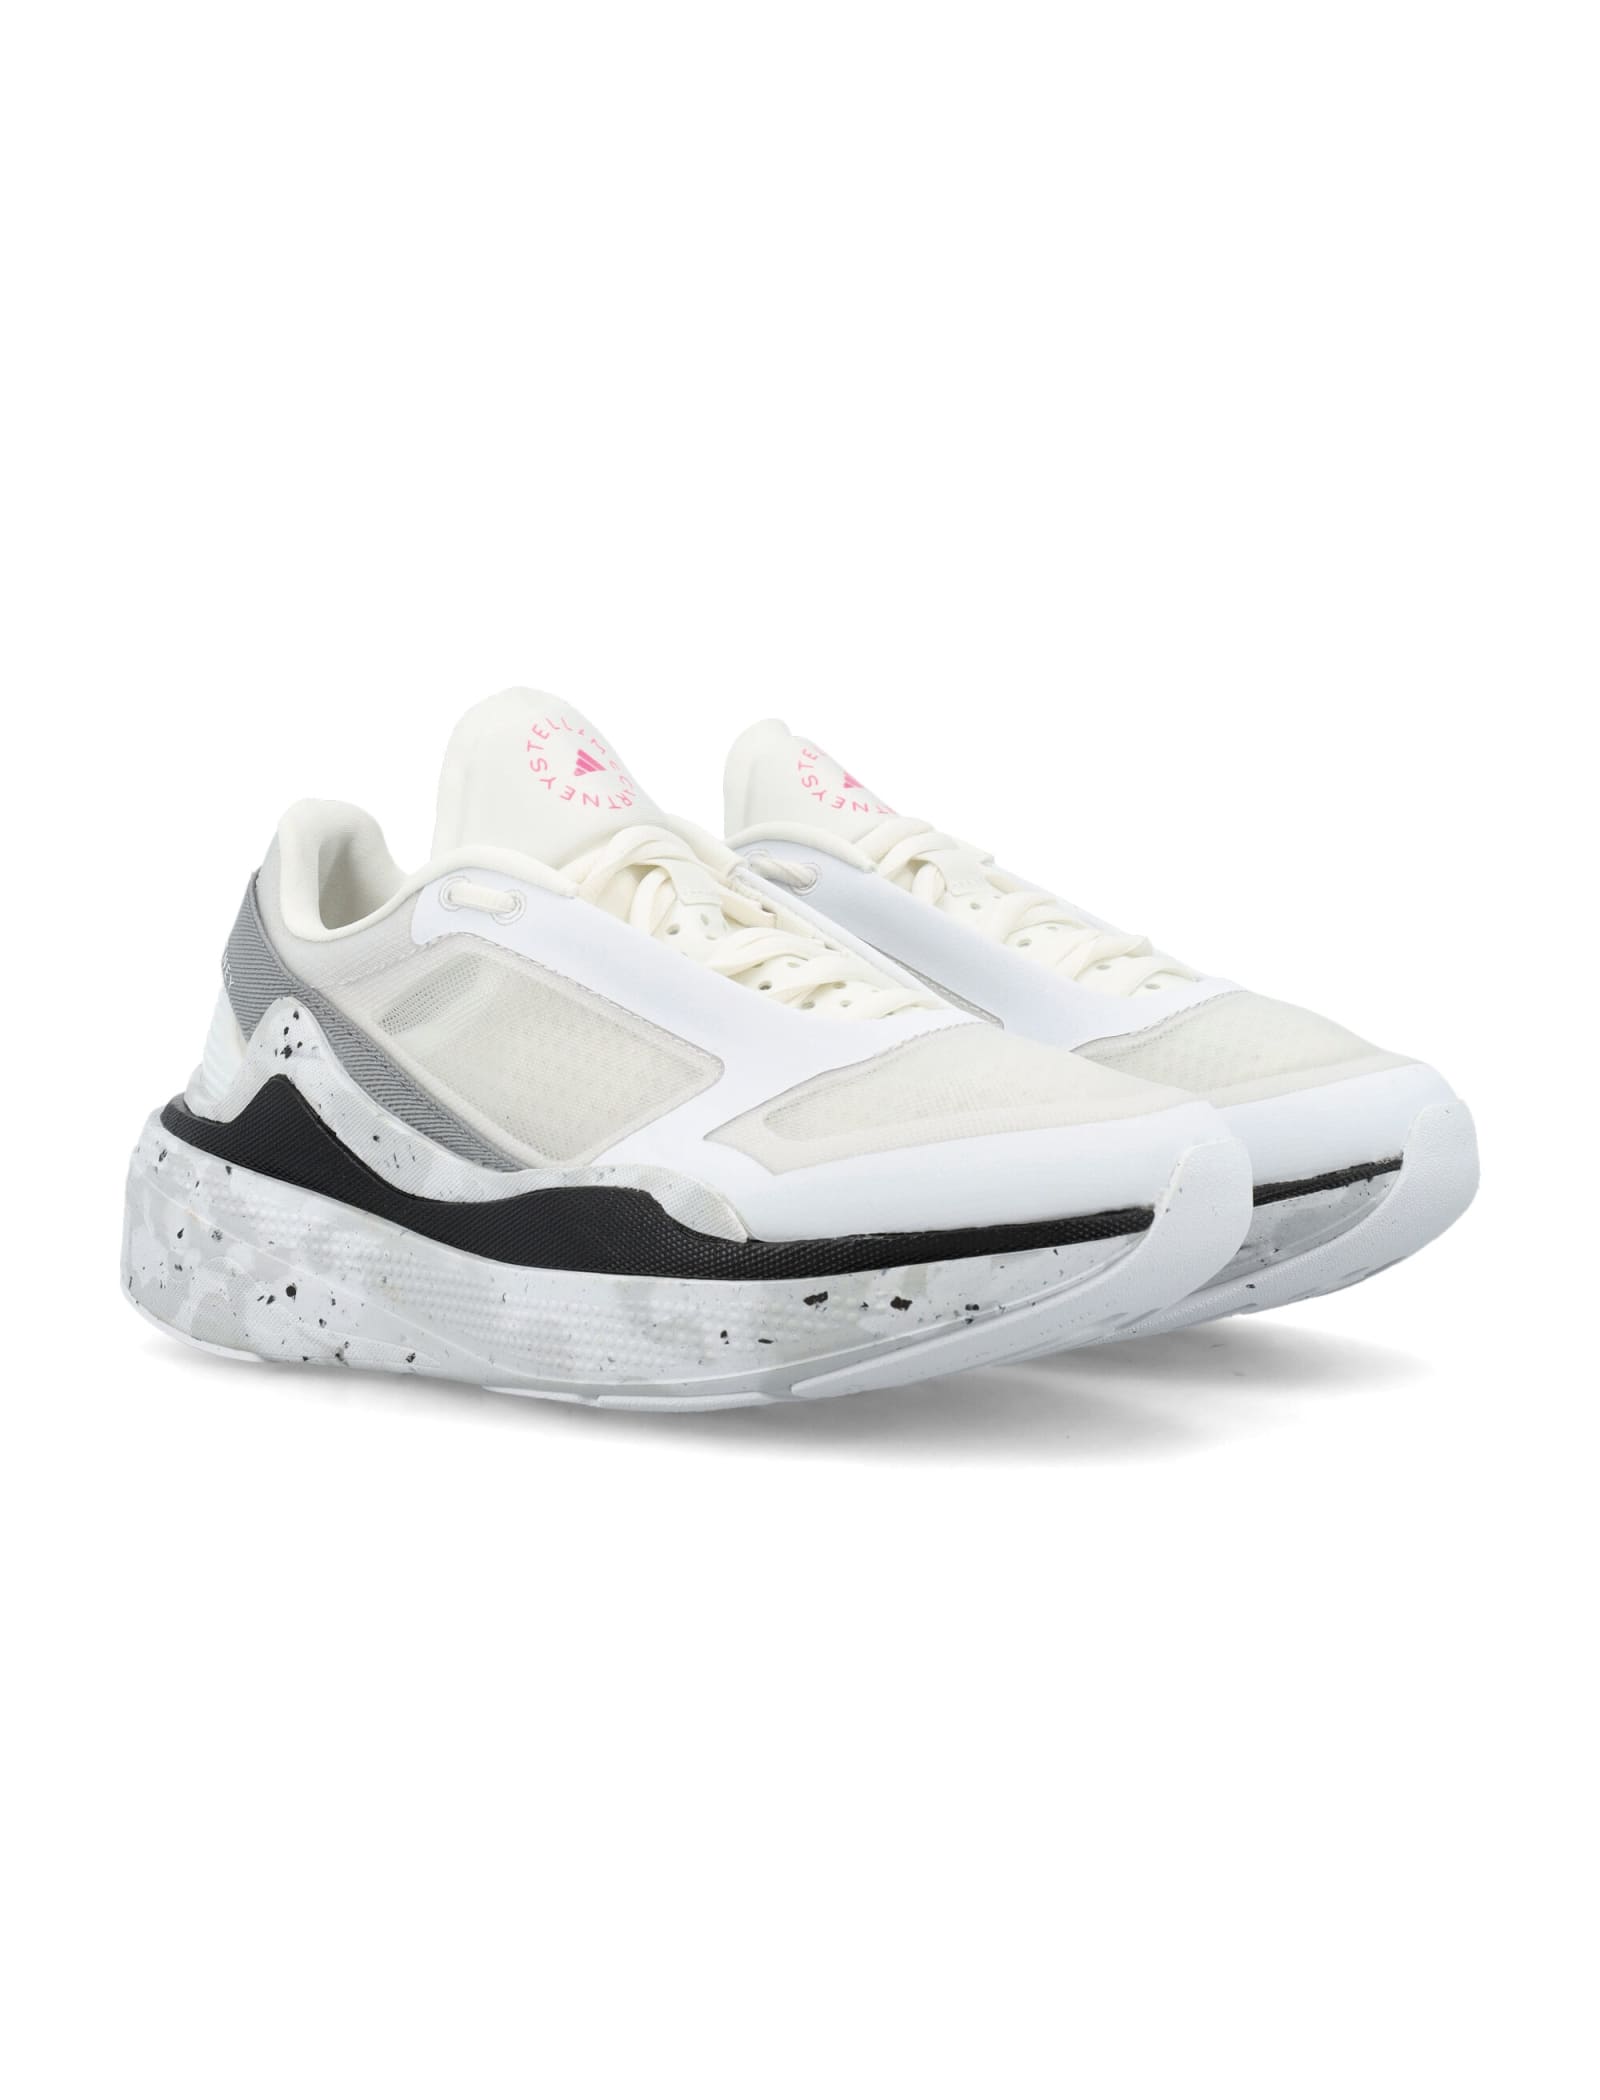 Shop Adidas By Stella Mccartney Womans Eartlight Mesh Running Shoes In White